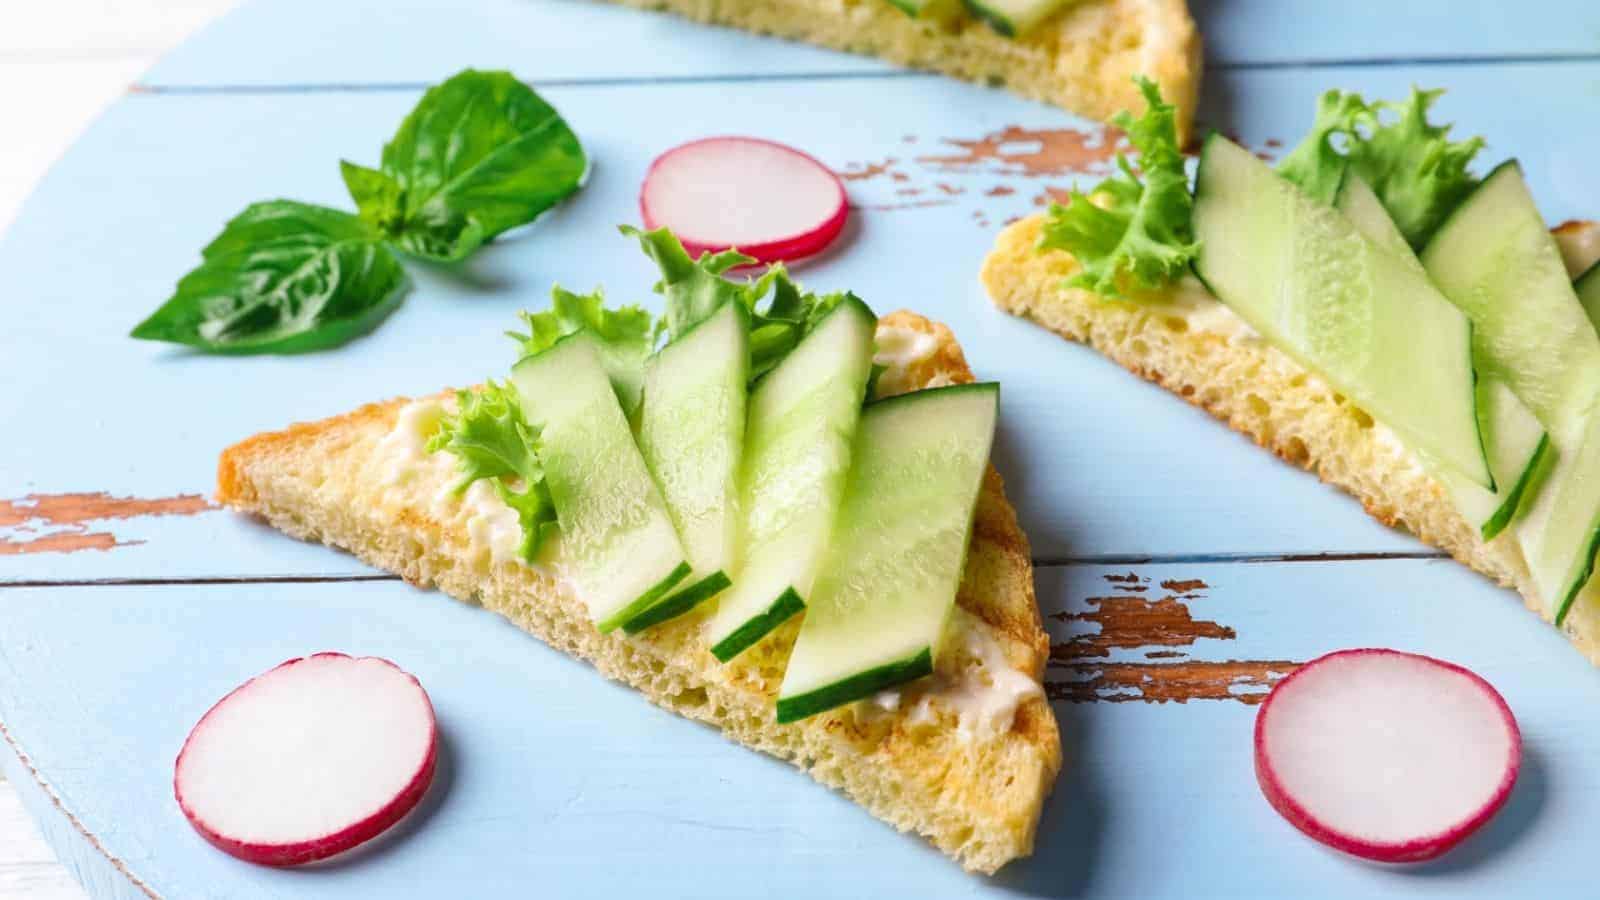 20 Tips to Make Your Favorite Sandwich Healthier